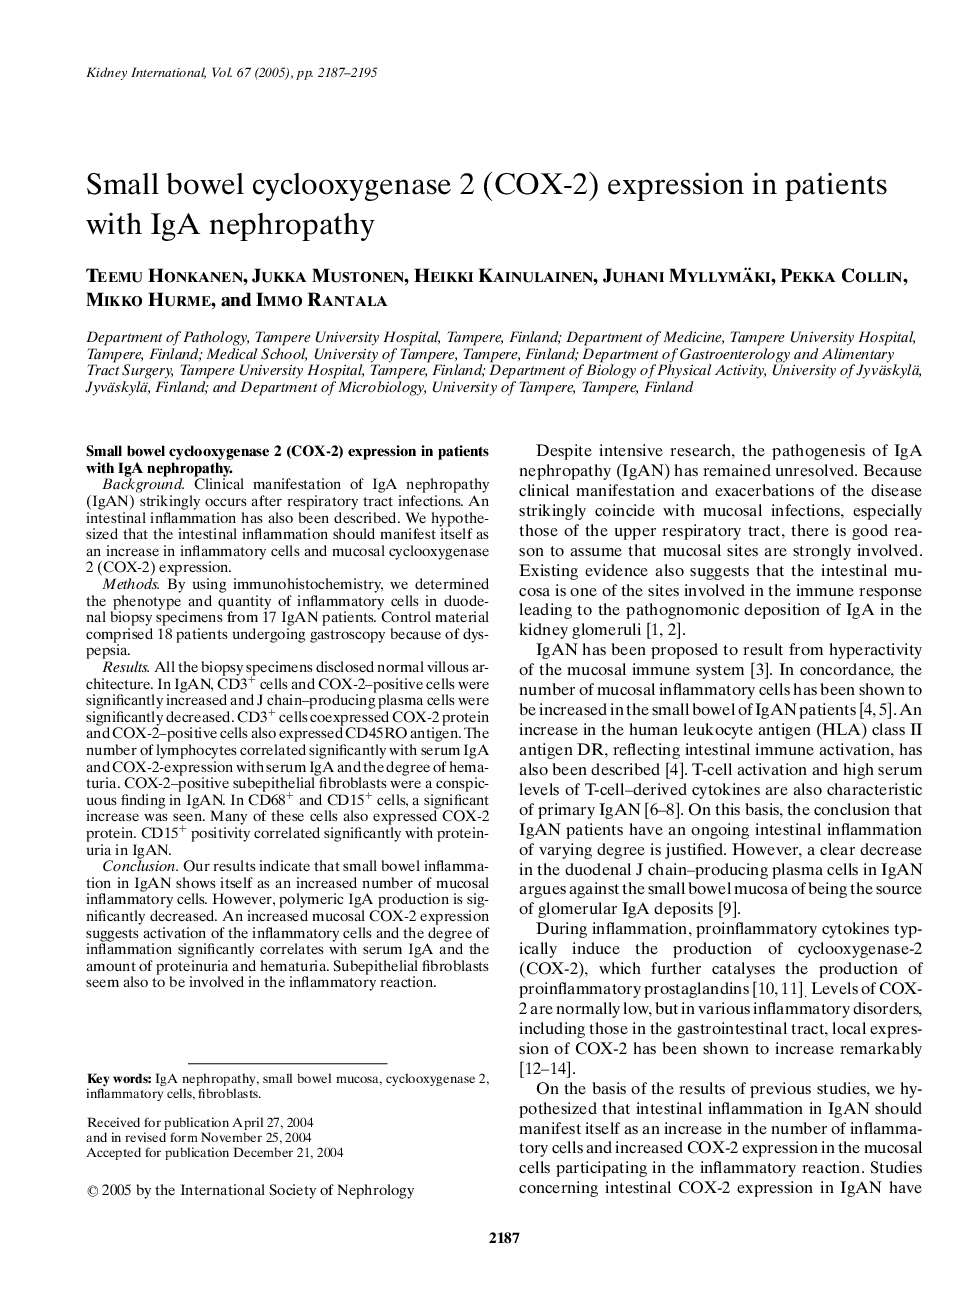 Small bowel cyclooxygenase 2 (COX-2) expression in patients with IgA nephropathy